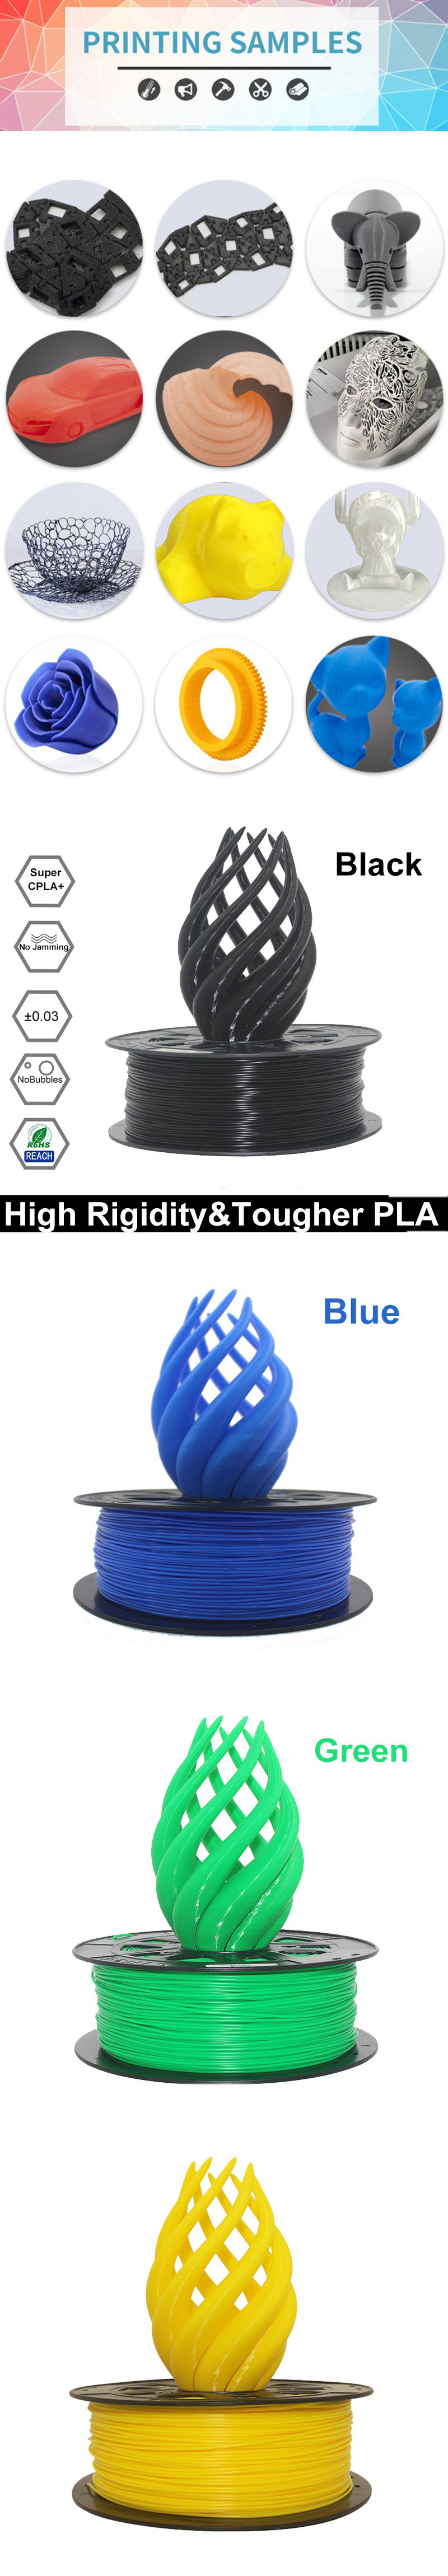 CCTREE® 1.75mm 1KG/Roll 3D Printer ST-PLA Filament For Creality CR-10/Ender-3 15